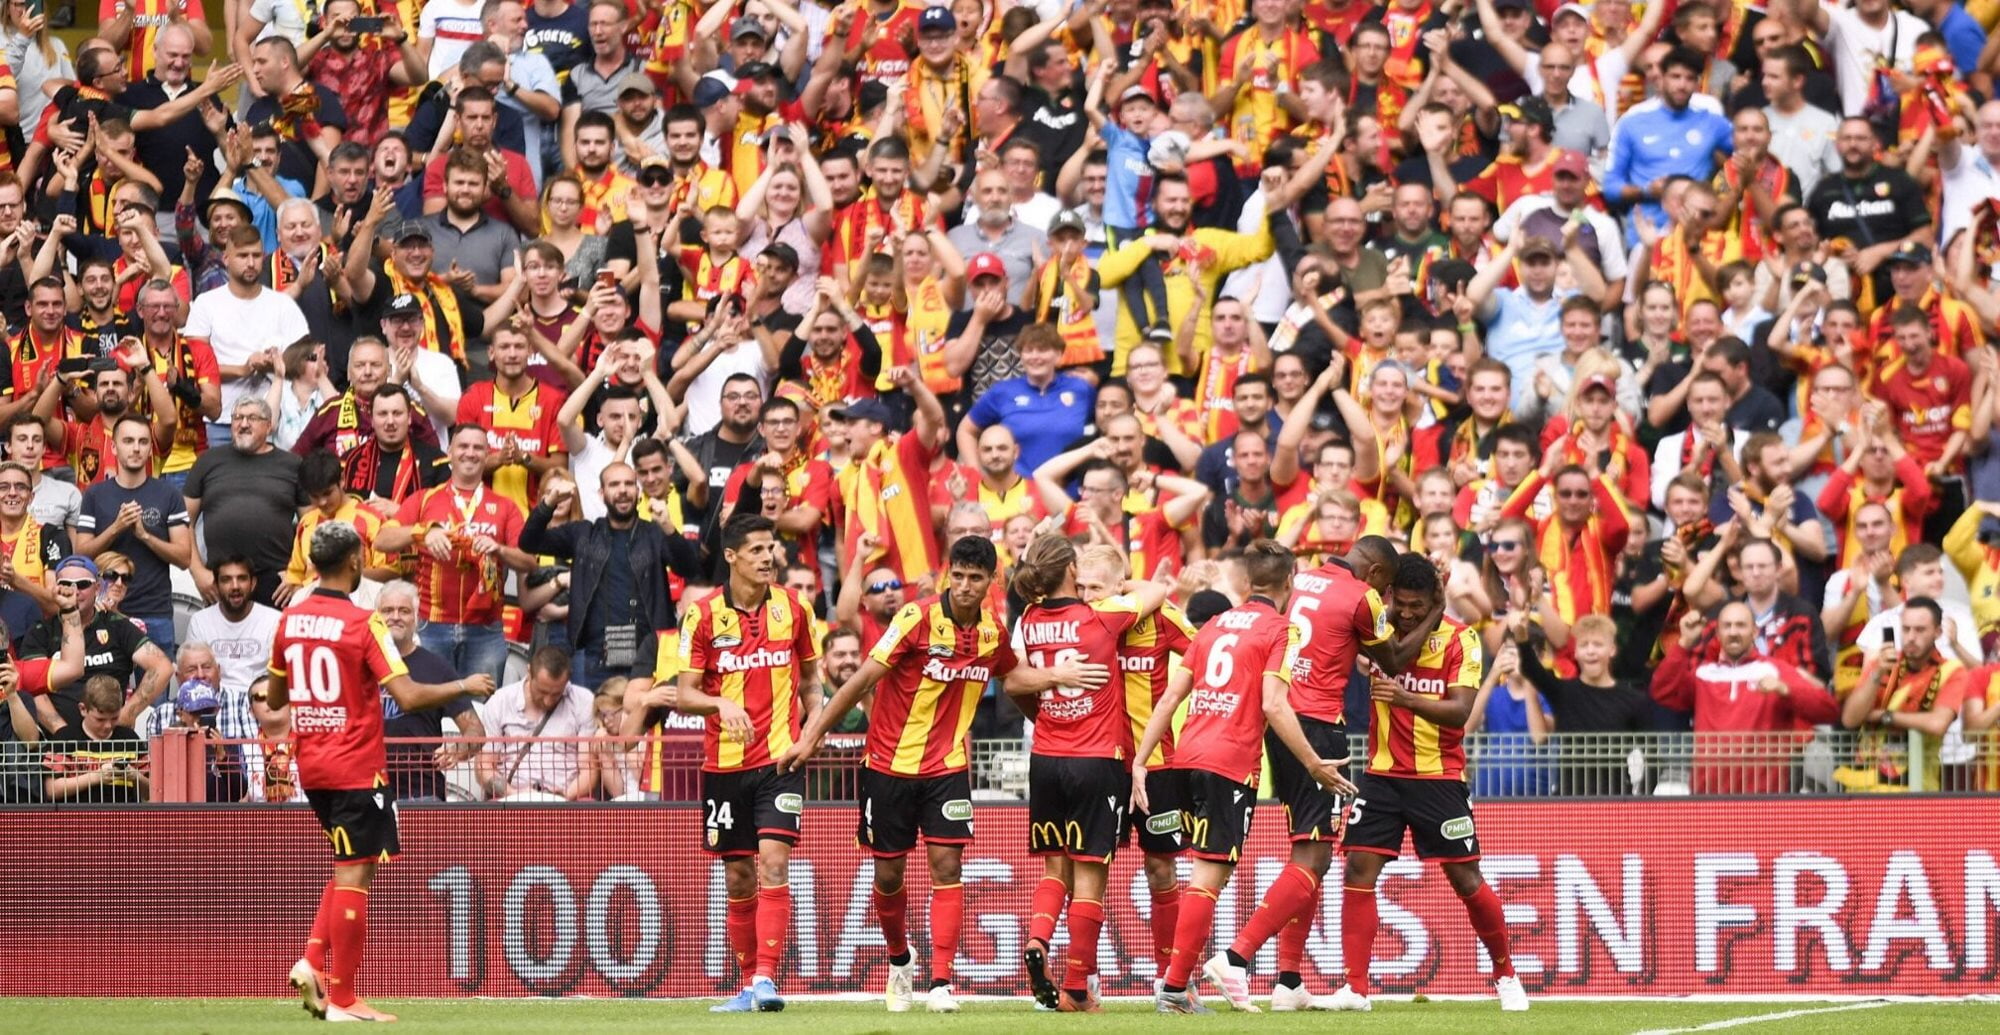 Supporters (RC Lens)